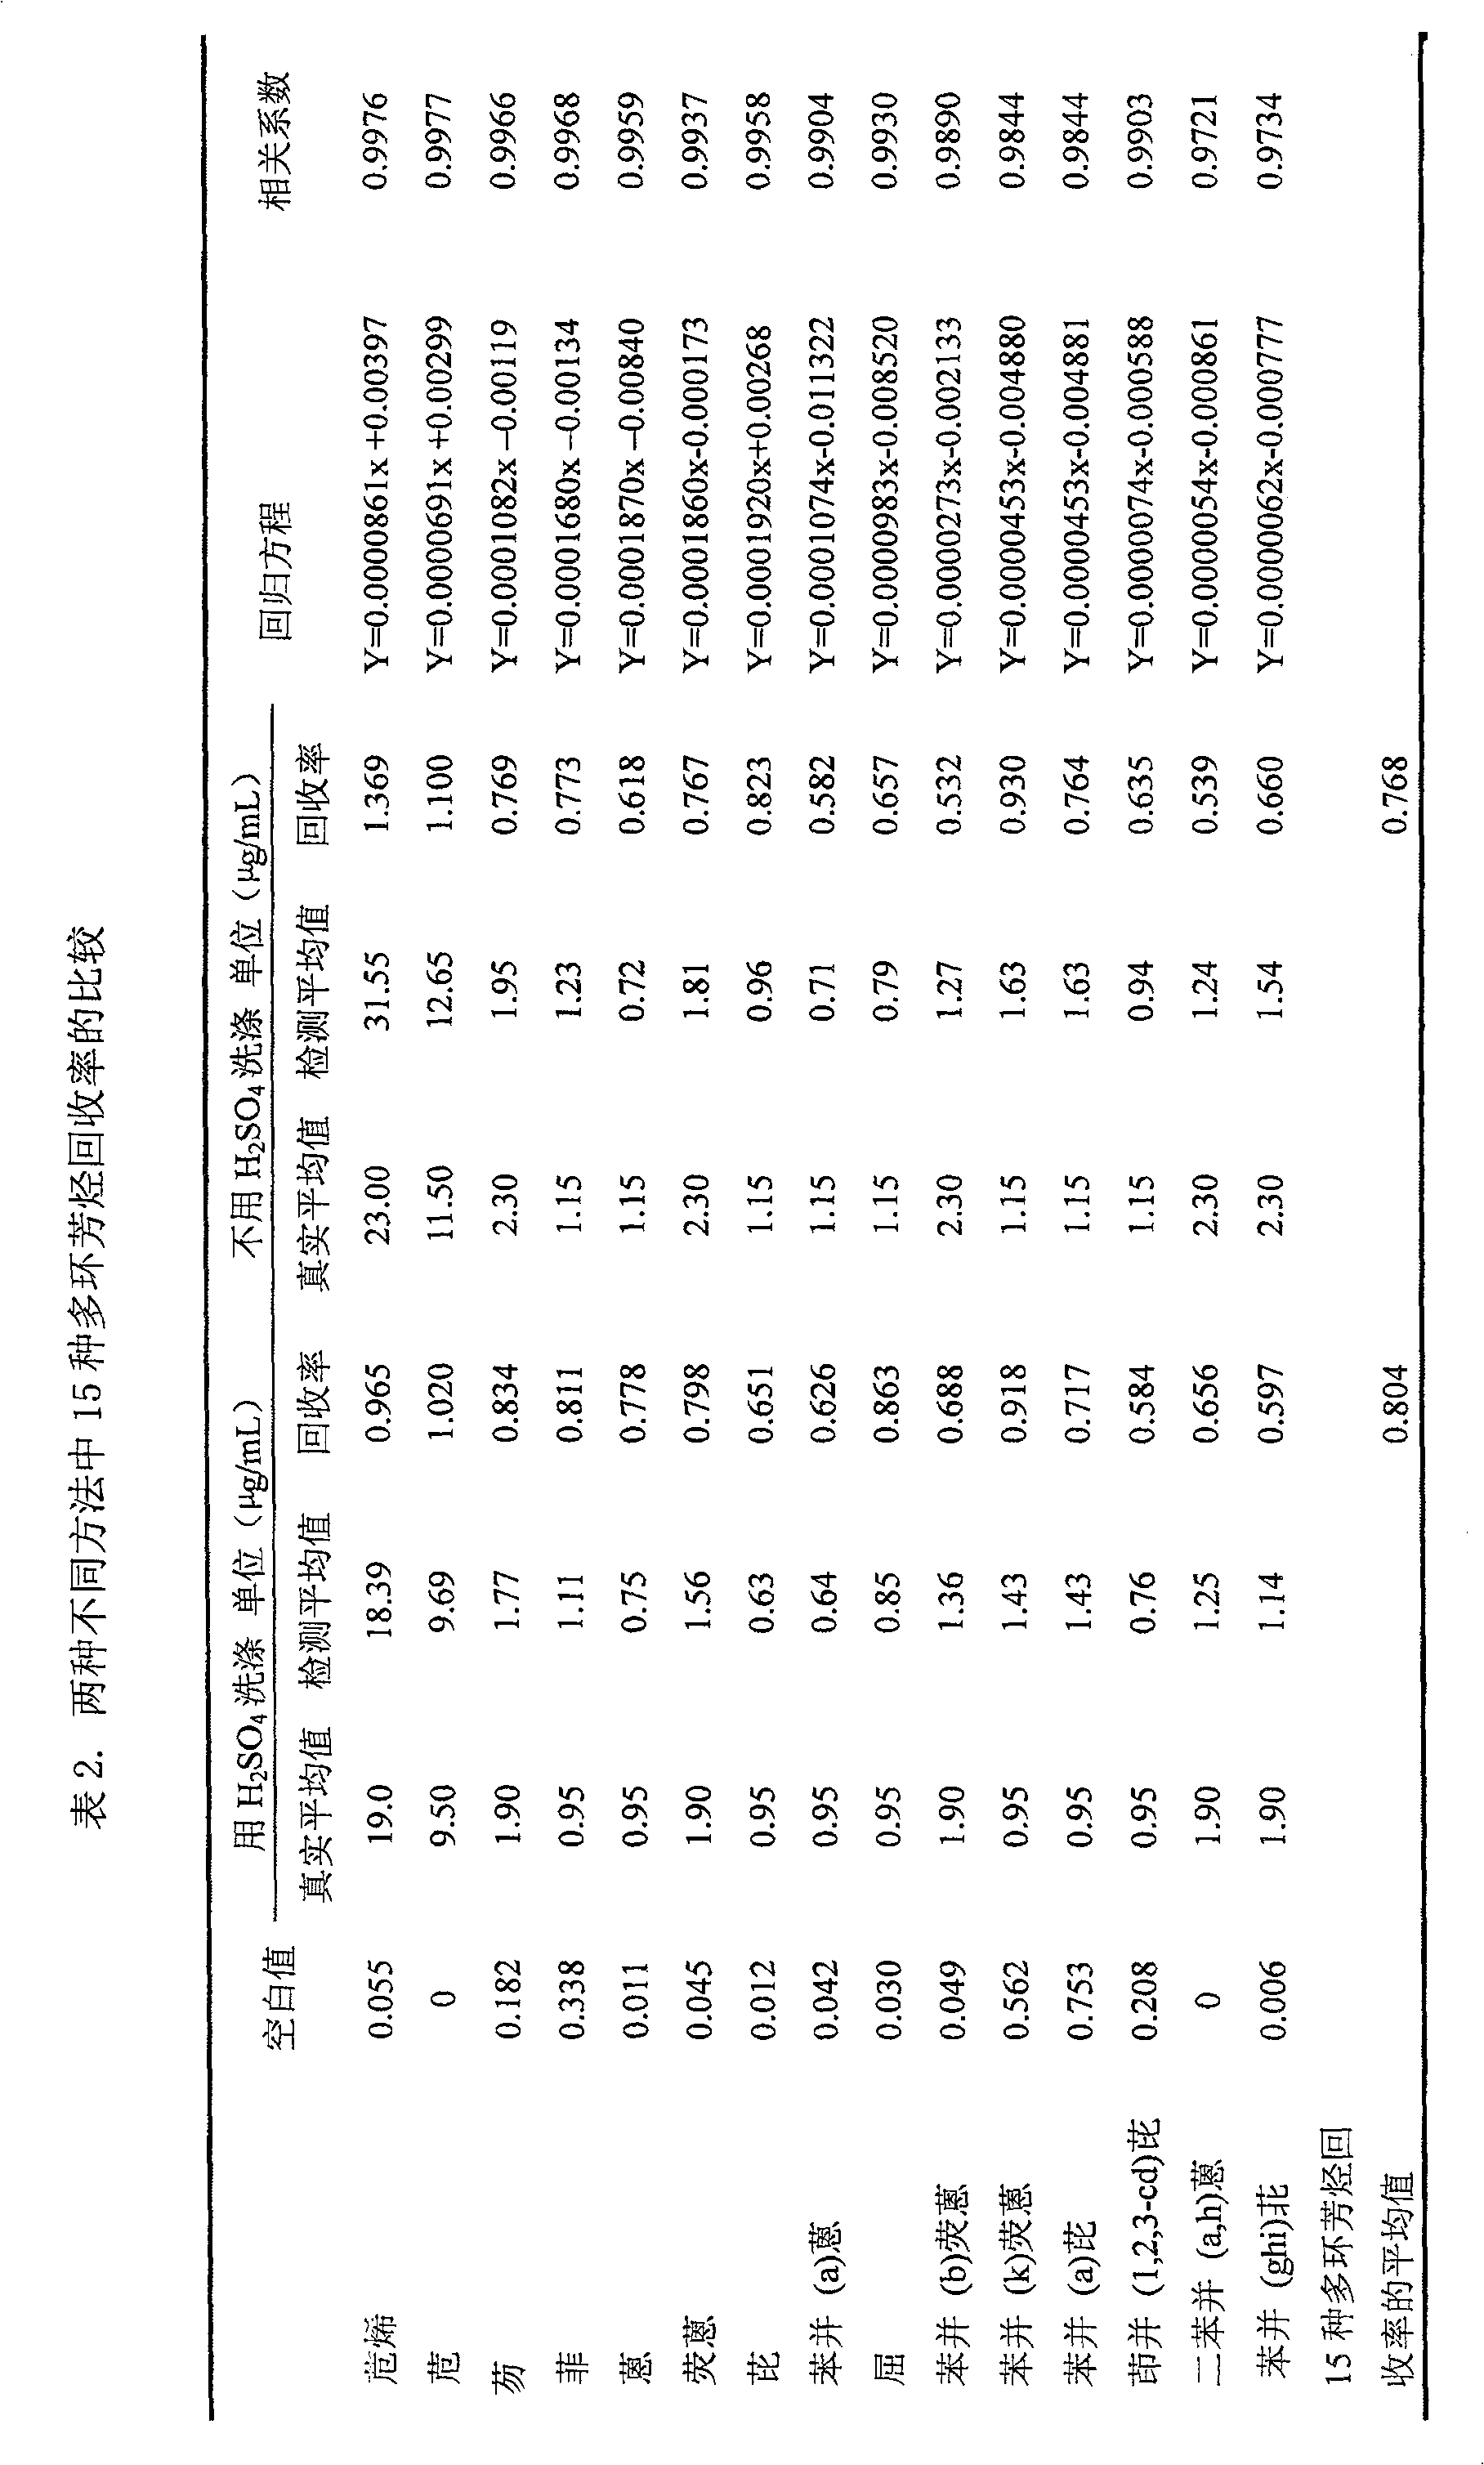 Method for determining polycyclic aromatic hydrocarbons in sludge